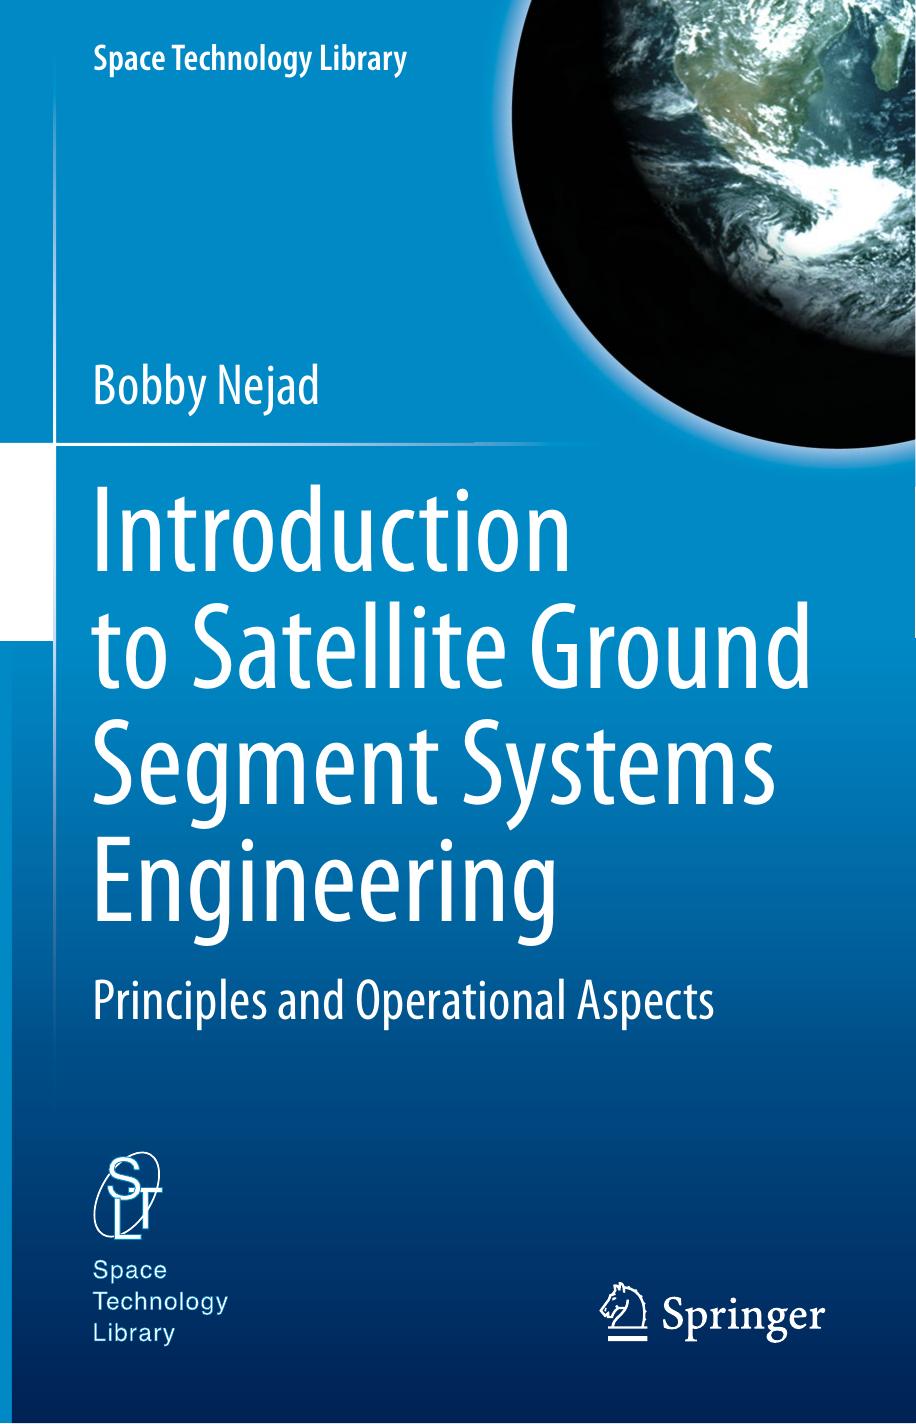 Introduction to Satellite Ground Segment Systems Engineering: Principles and Operational Aspects by Bobby Nejad